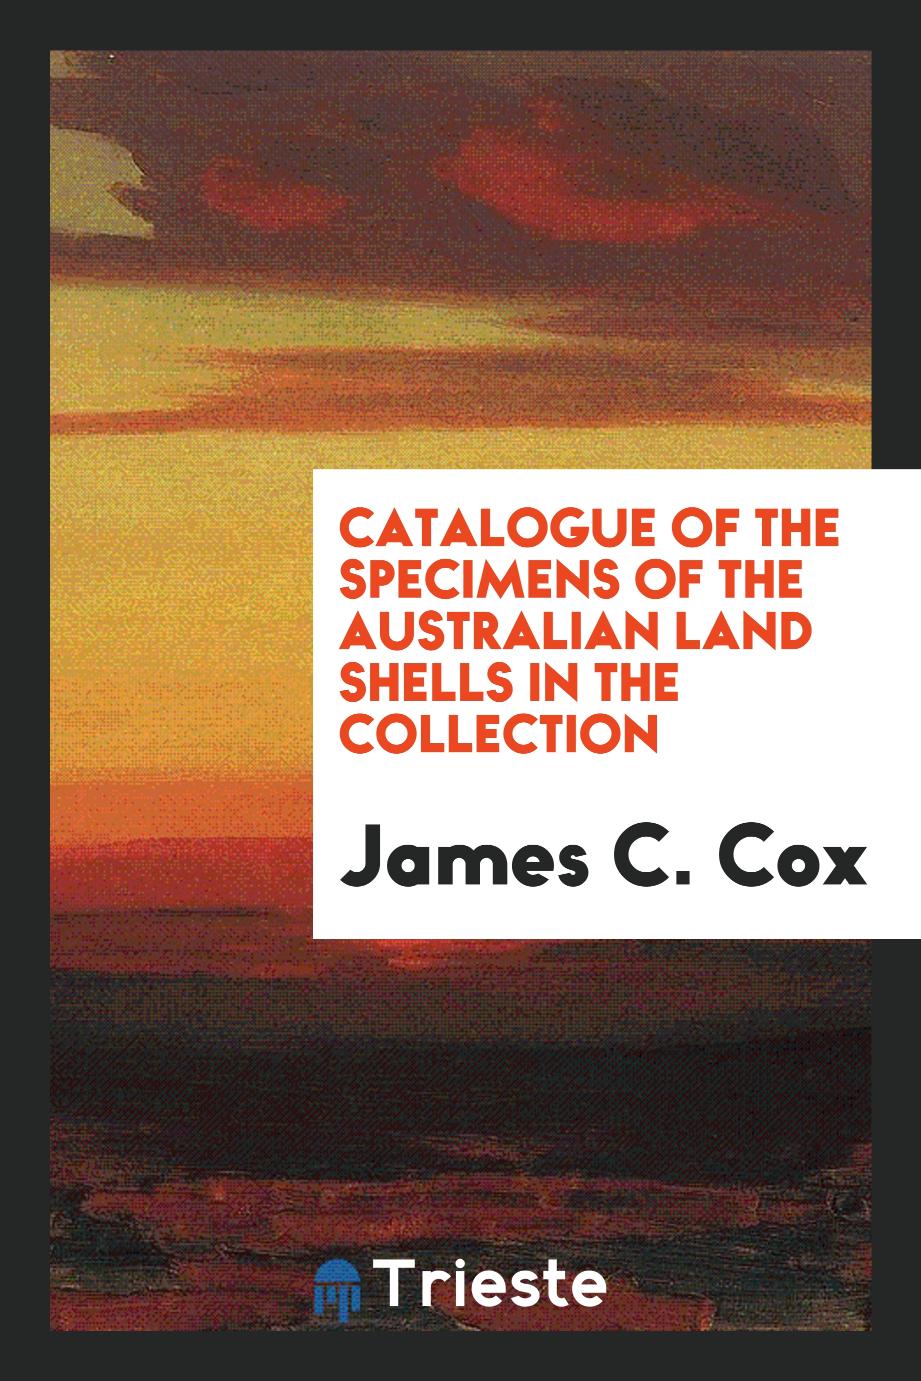 Catalogue of the specimens of the Australian land shells in the collection